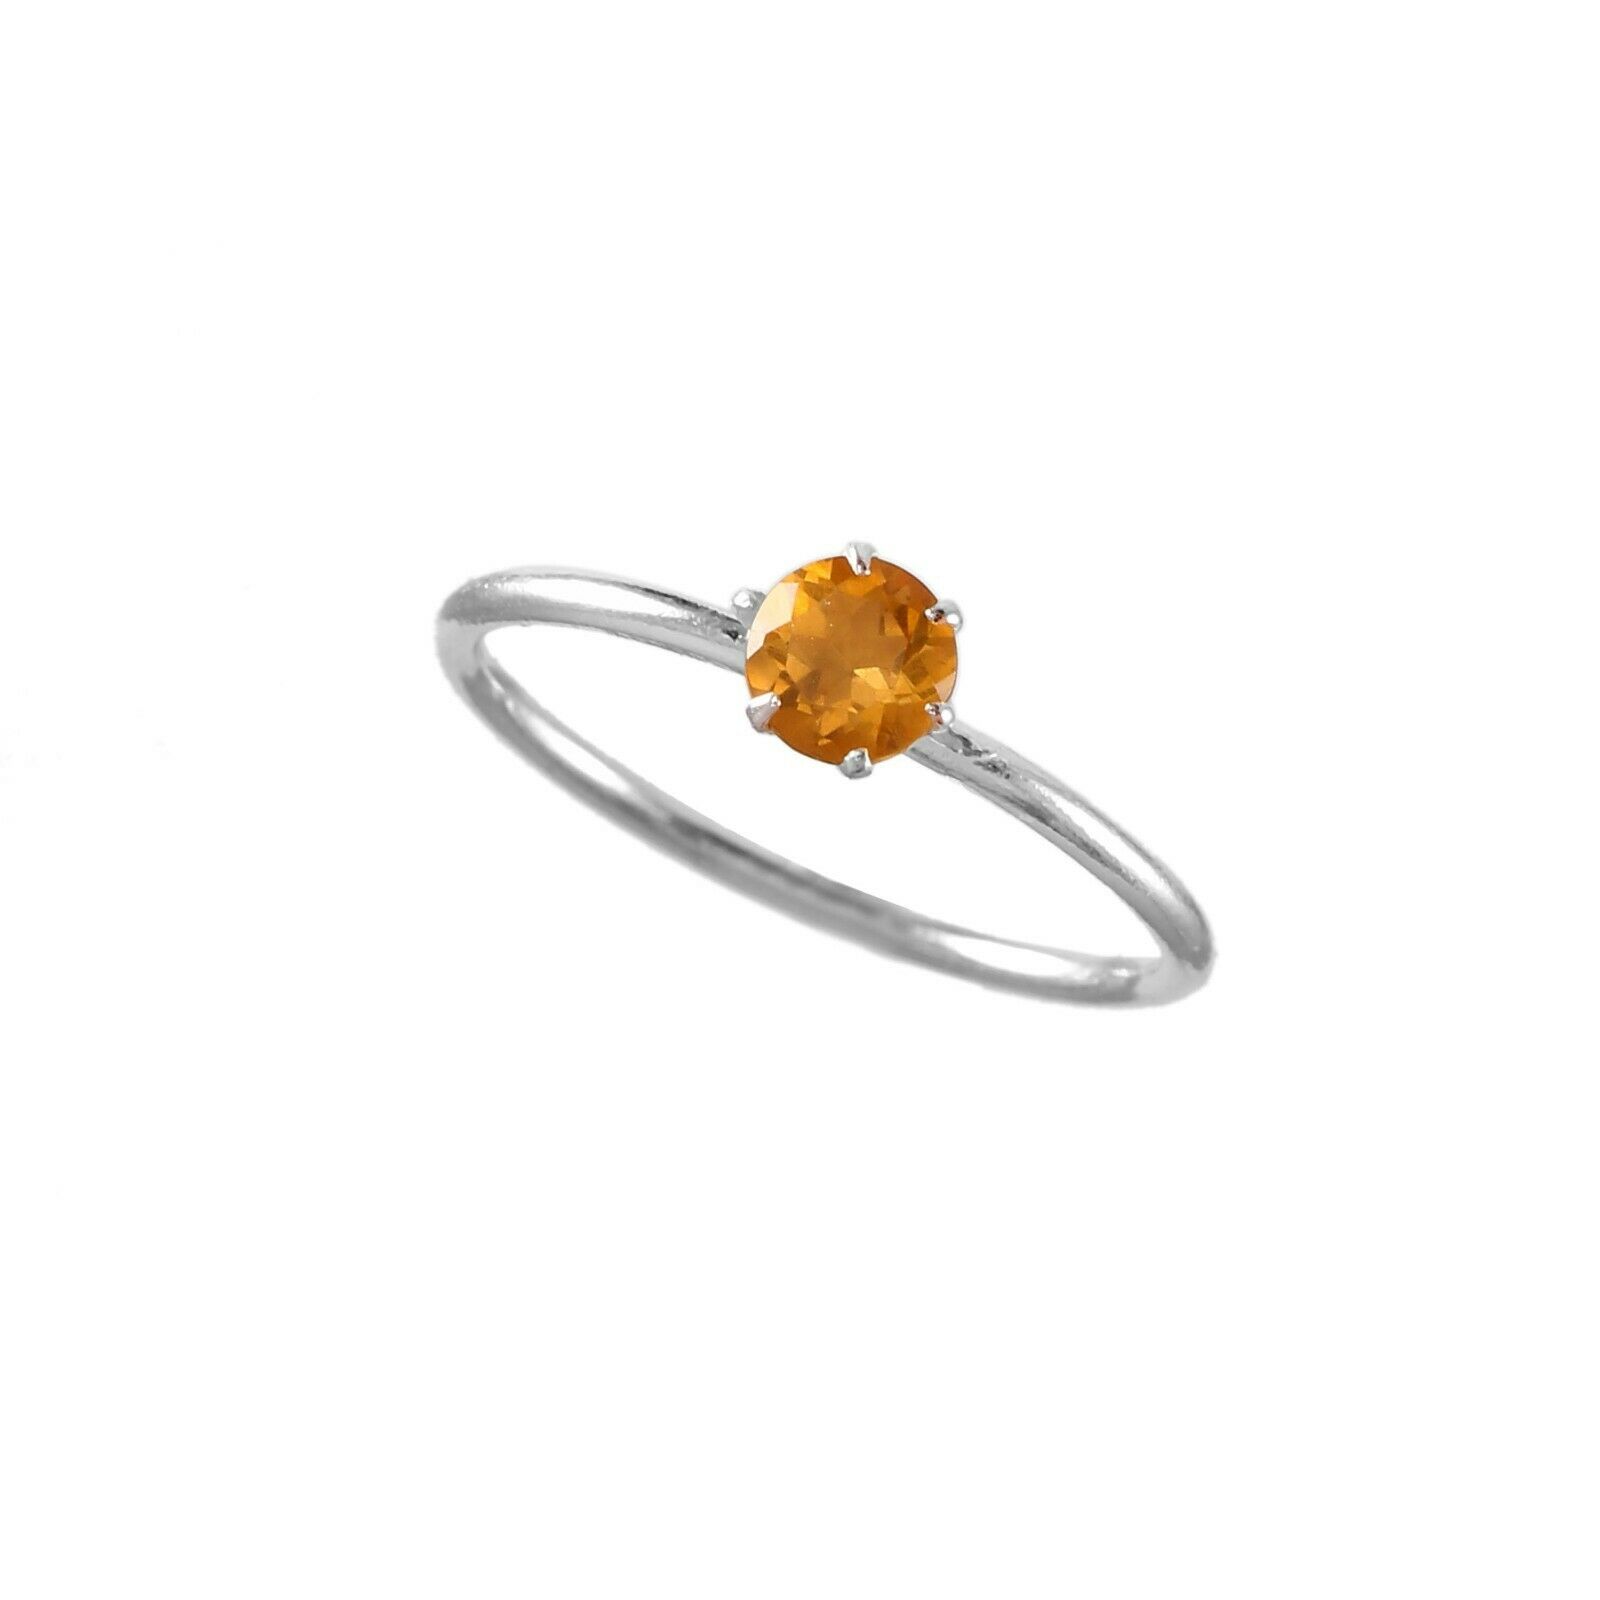 Natural Citrine 925 Sterling Silver Jewelry Stone Size 4 Mm Round Shape